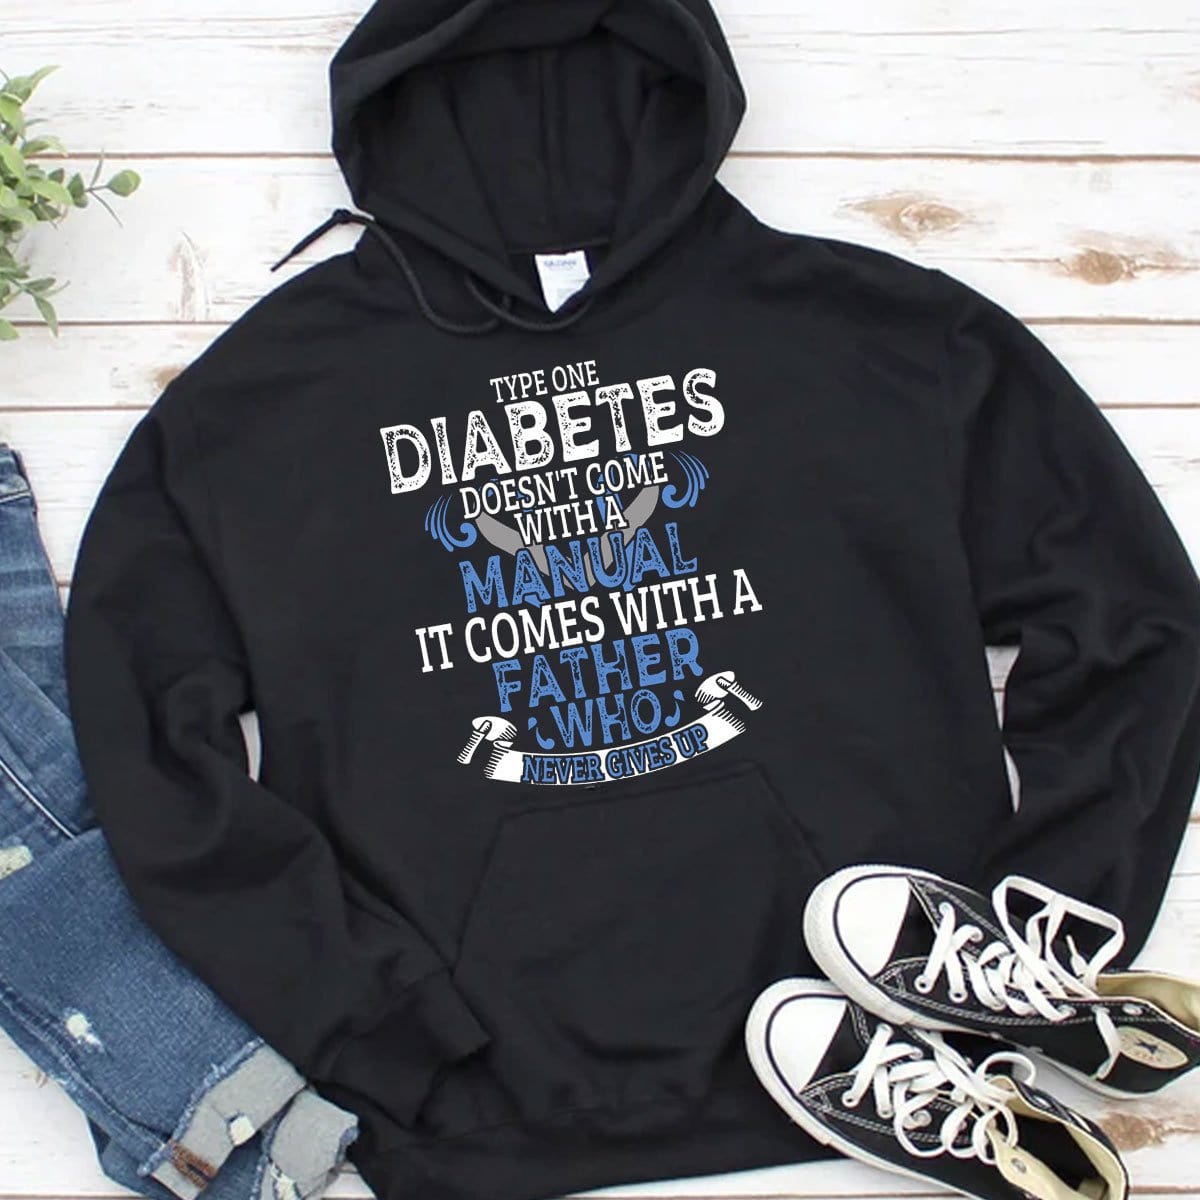 Type 1 Diabetes Doesn't Come With A Manual It Comes With A Father Who Never Gives Up Hoodie, Shirts